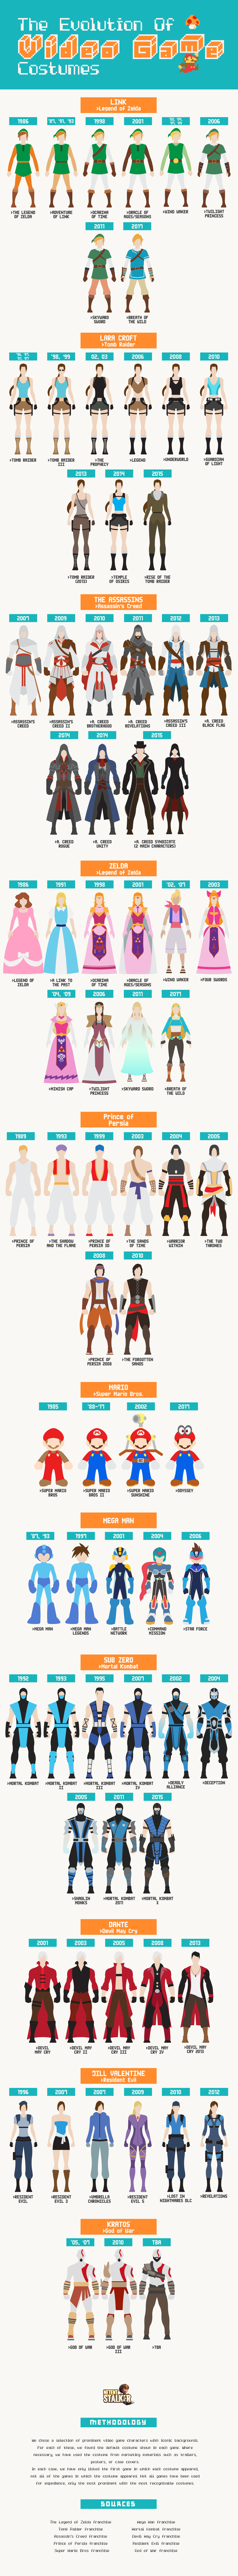 The Evolution of Video Game Costumes | NetEnt Stalker